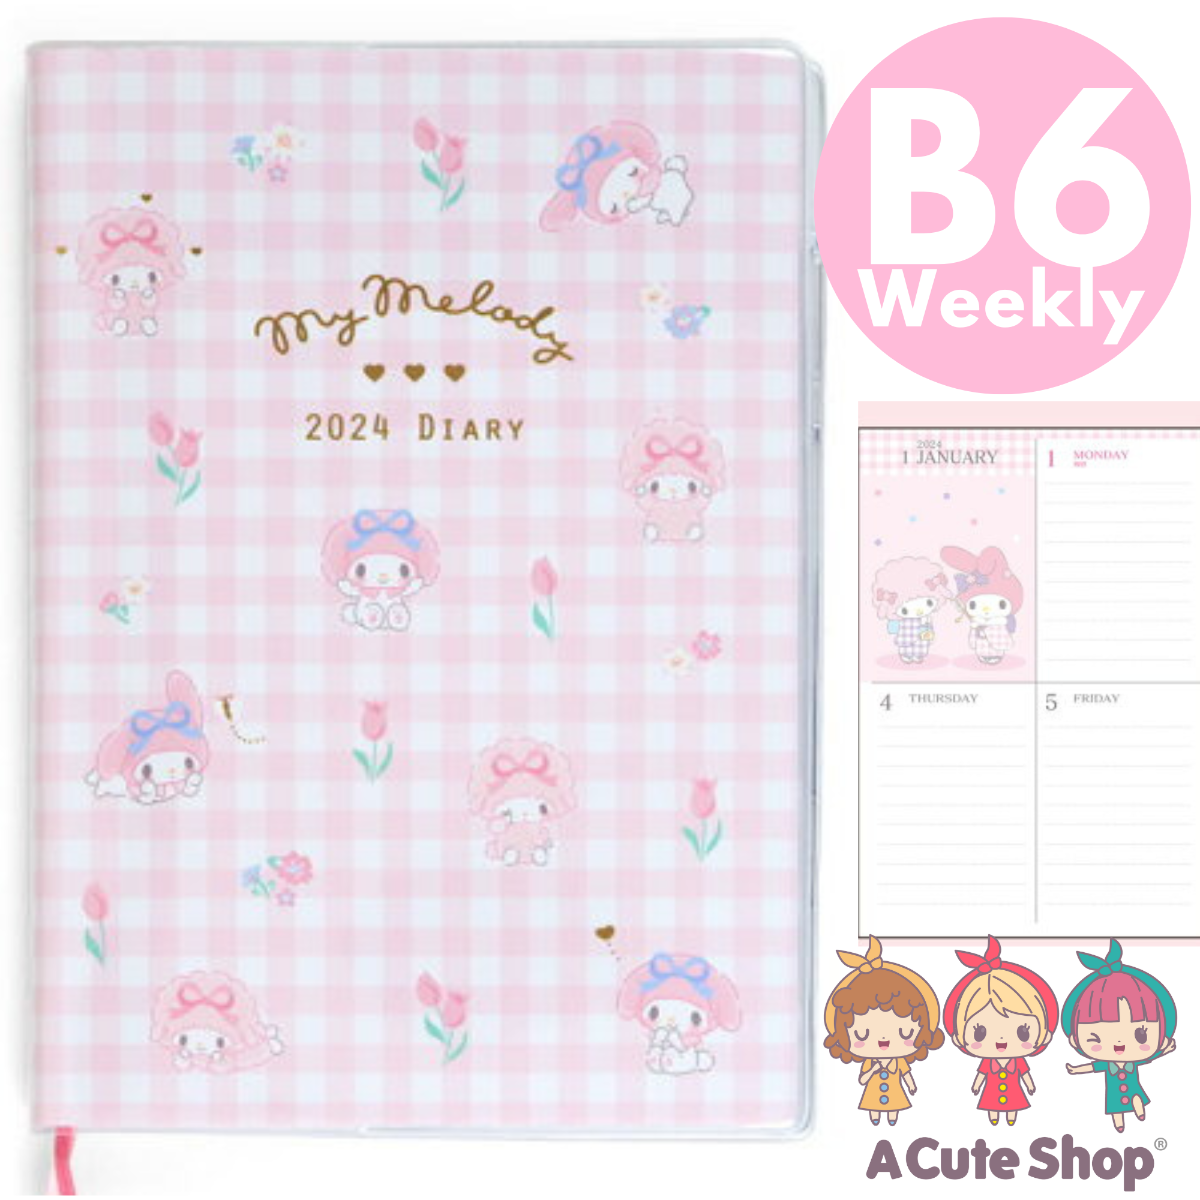 ❤SHIPPING NOW❤2024 Diary My Melody B6 Weekly Planner BLOCK TYPE Notebook Schedule Book Agenda w/ BONUS GIFT A Cute Shop - Inspired by You For The Cute Soul 